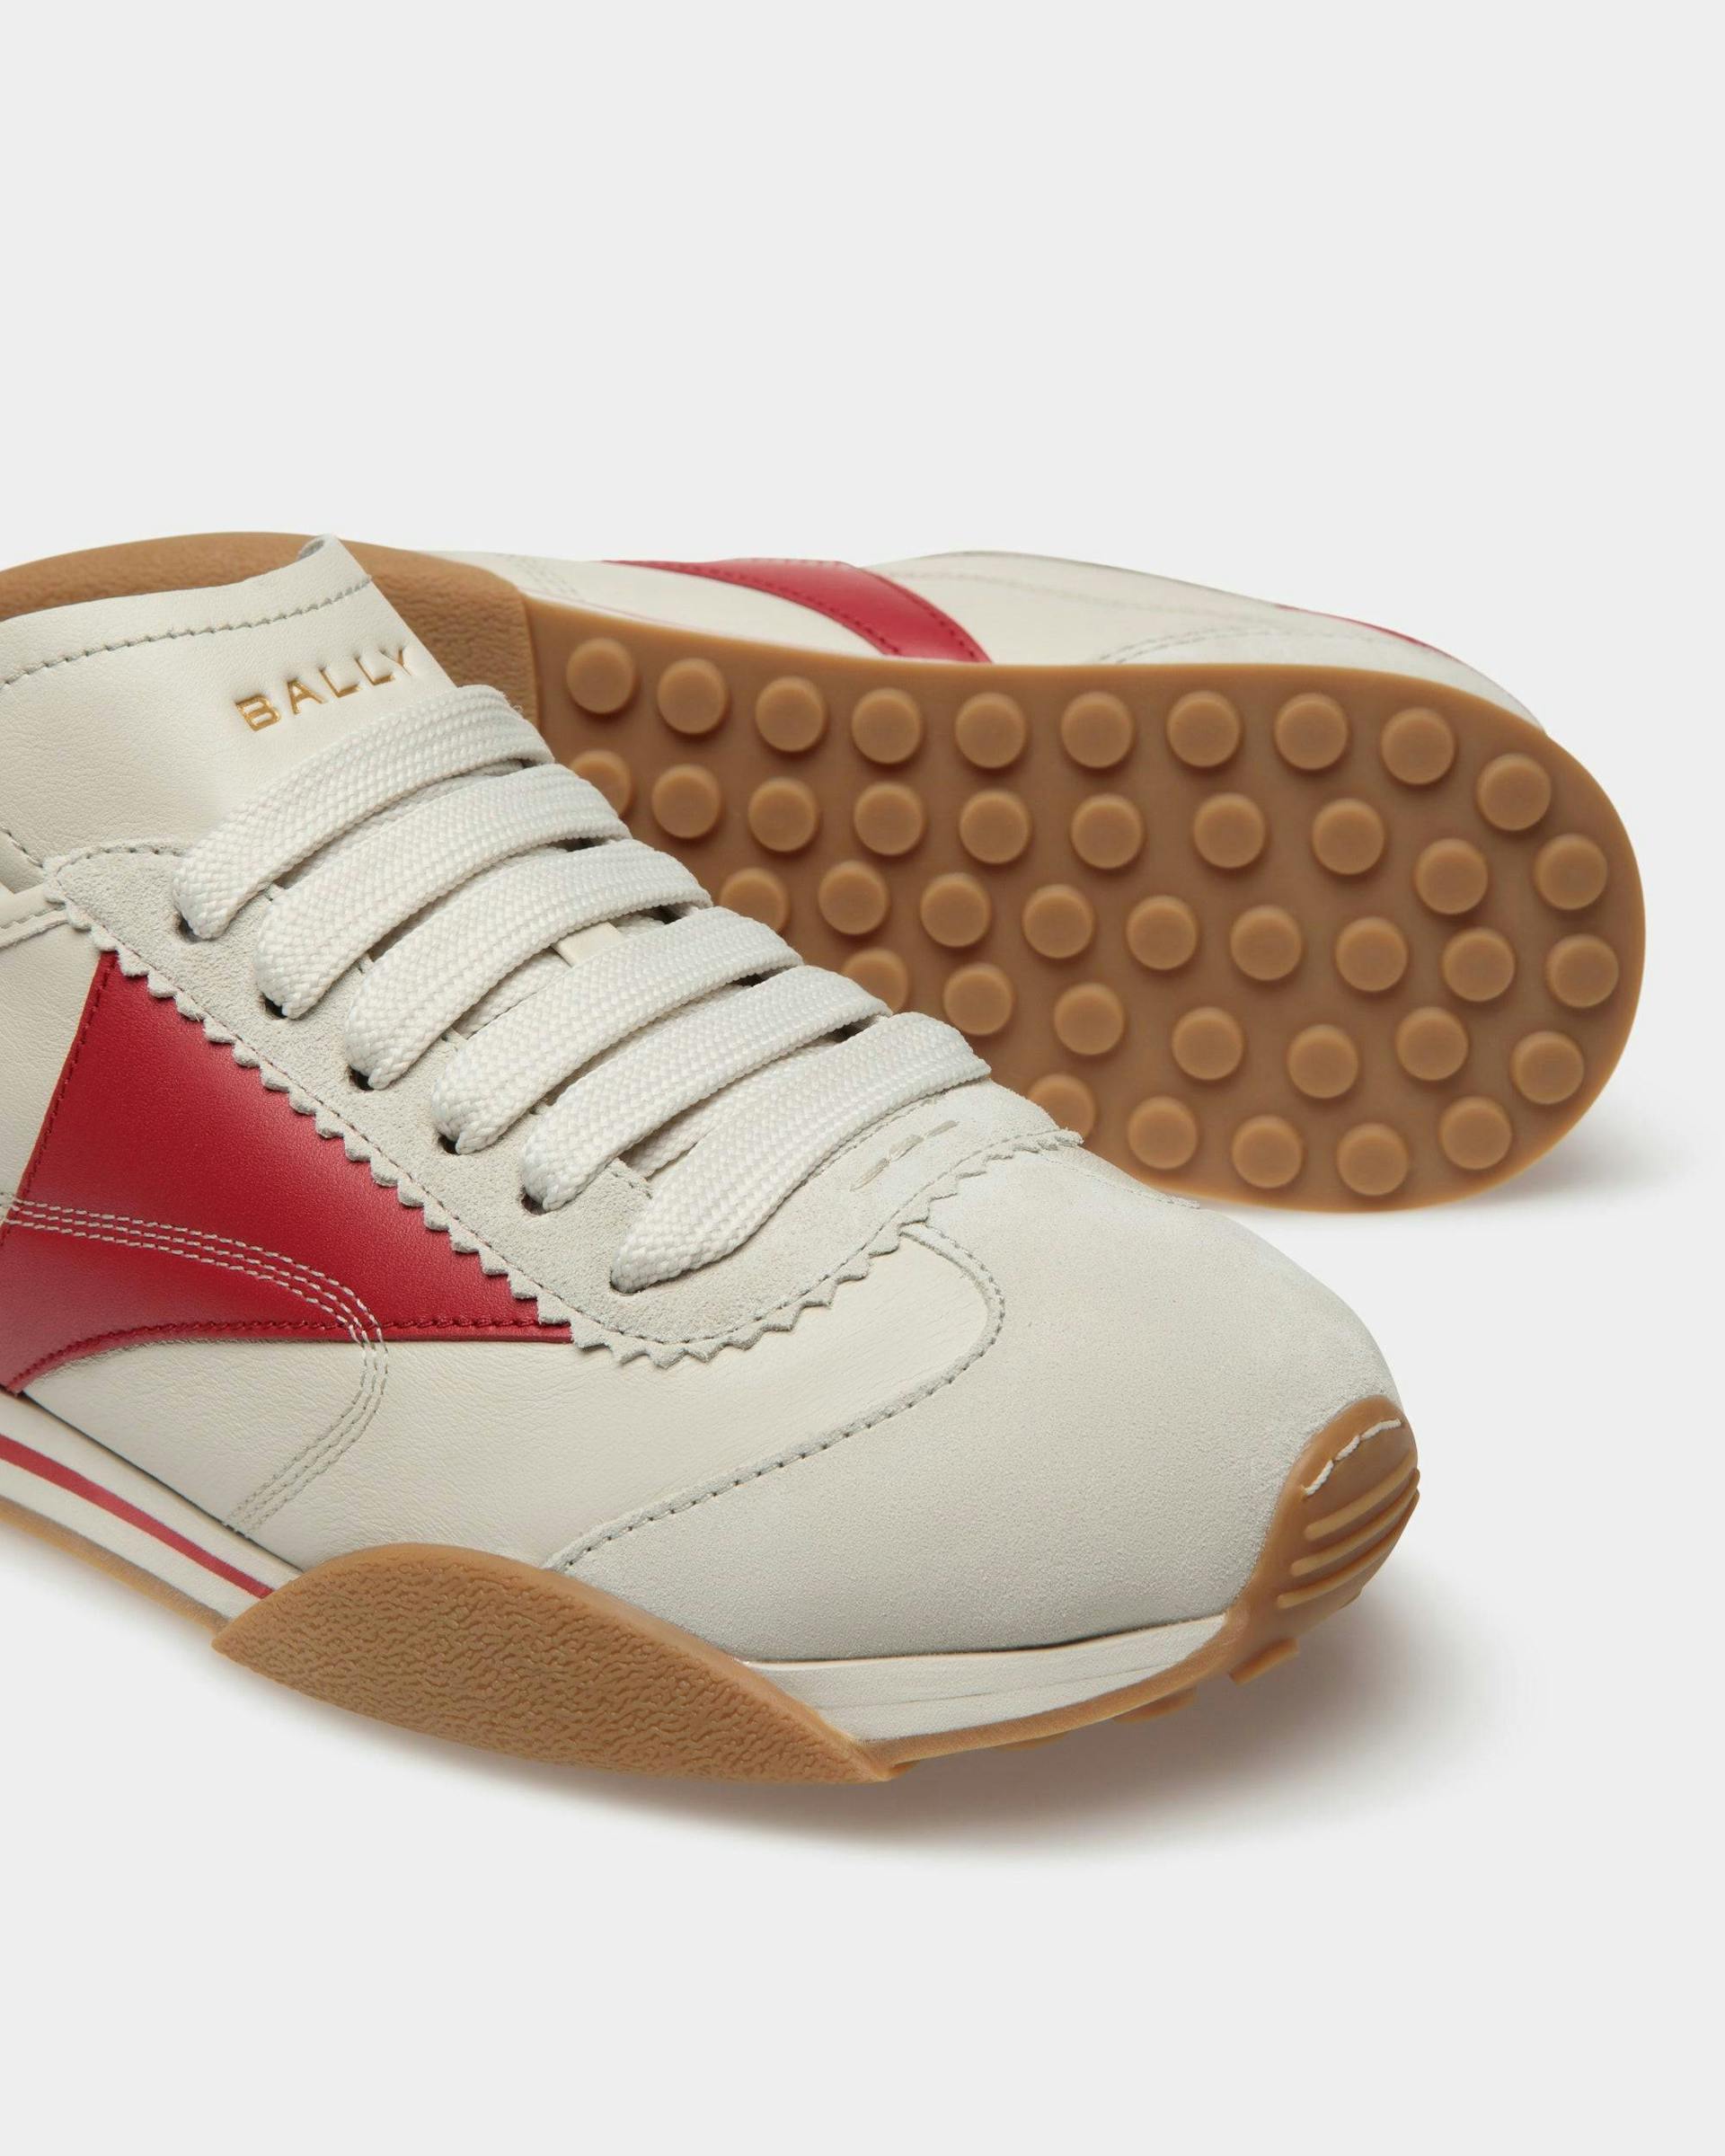 Sussex Sneakers In Dusty White And Deep Ruby Leather - Men's - Bally - 04